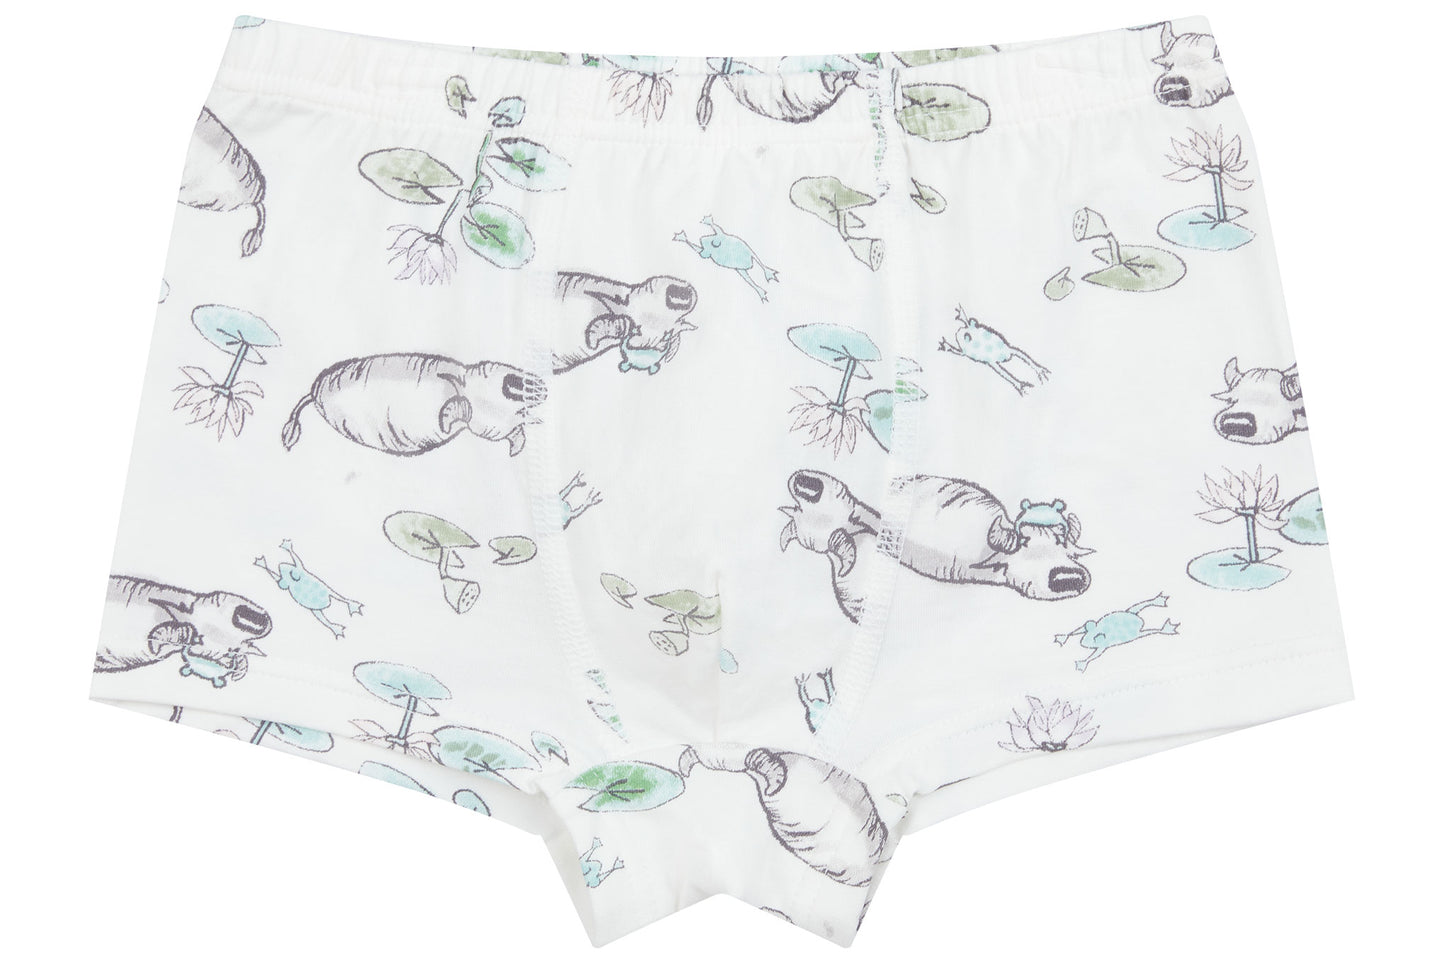 Boys Boxer Briefs Underwear (Bamboo, 2 Pack) - The Hare & The Ant